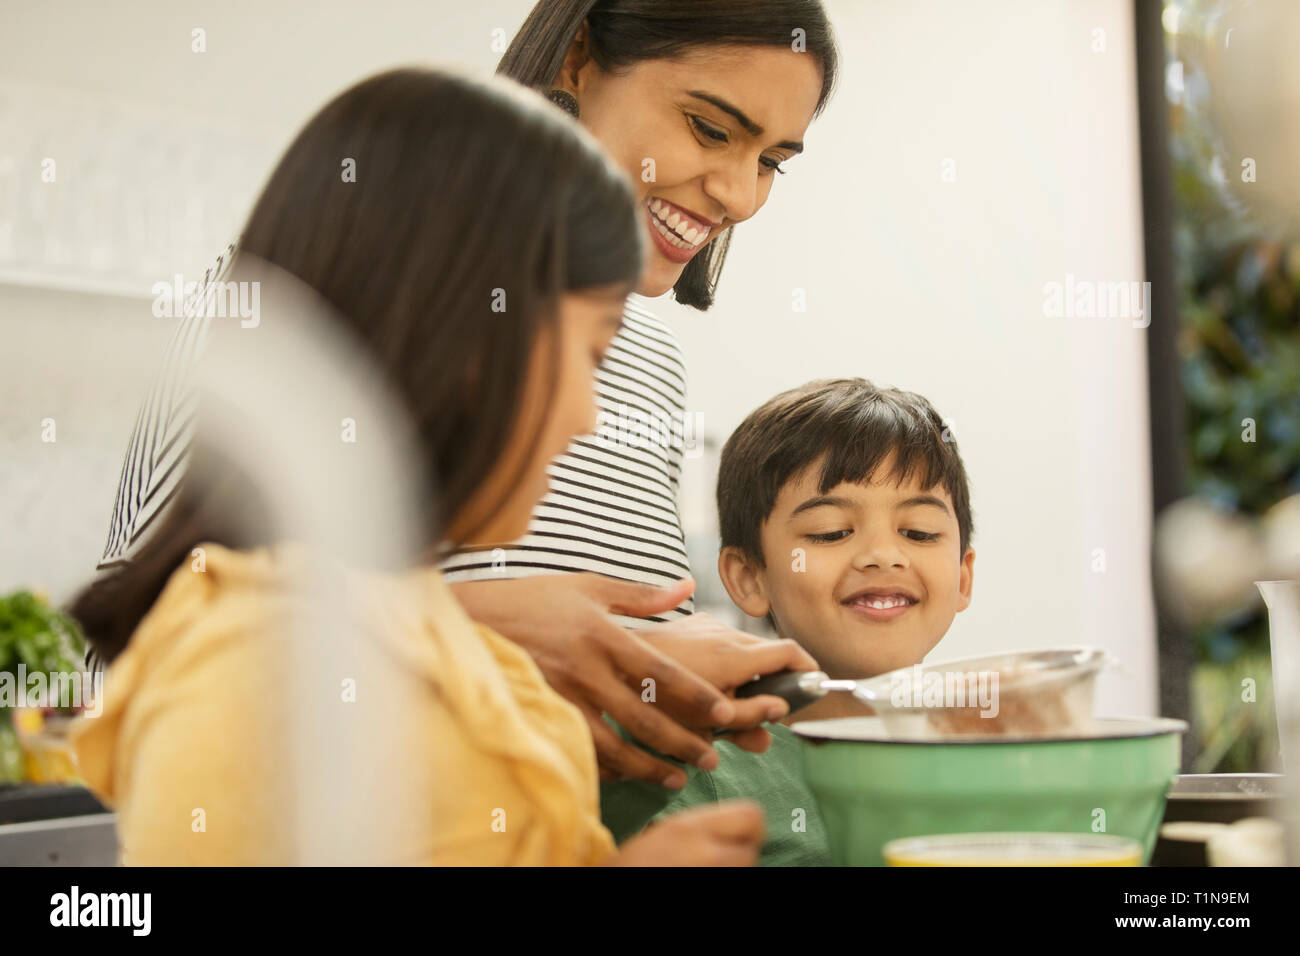 Mother and children baking in kitchen Stock Photo